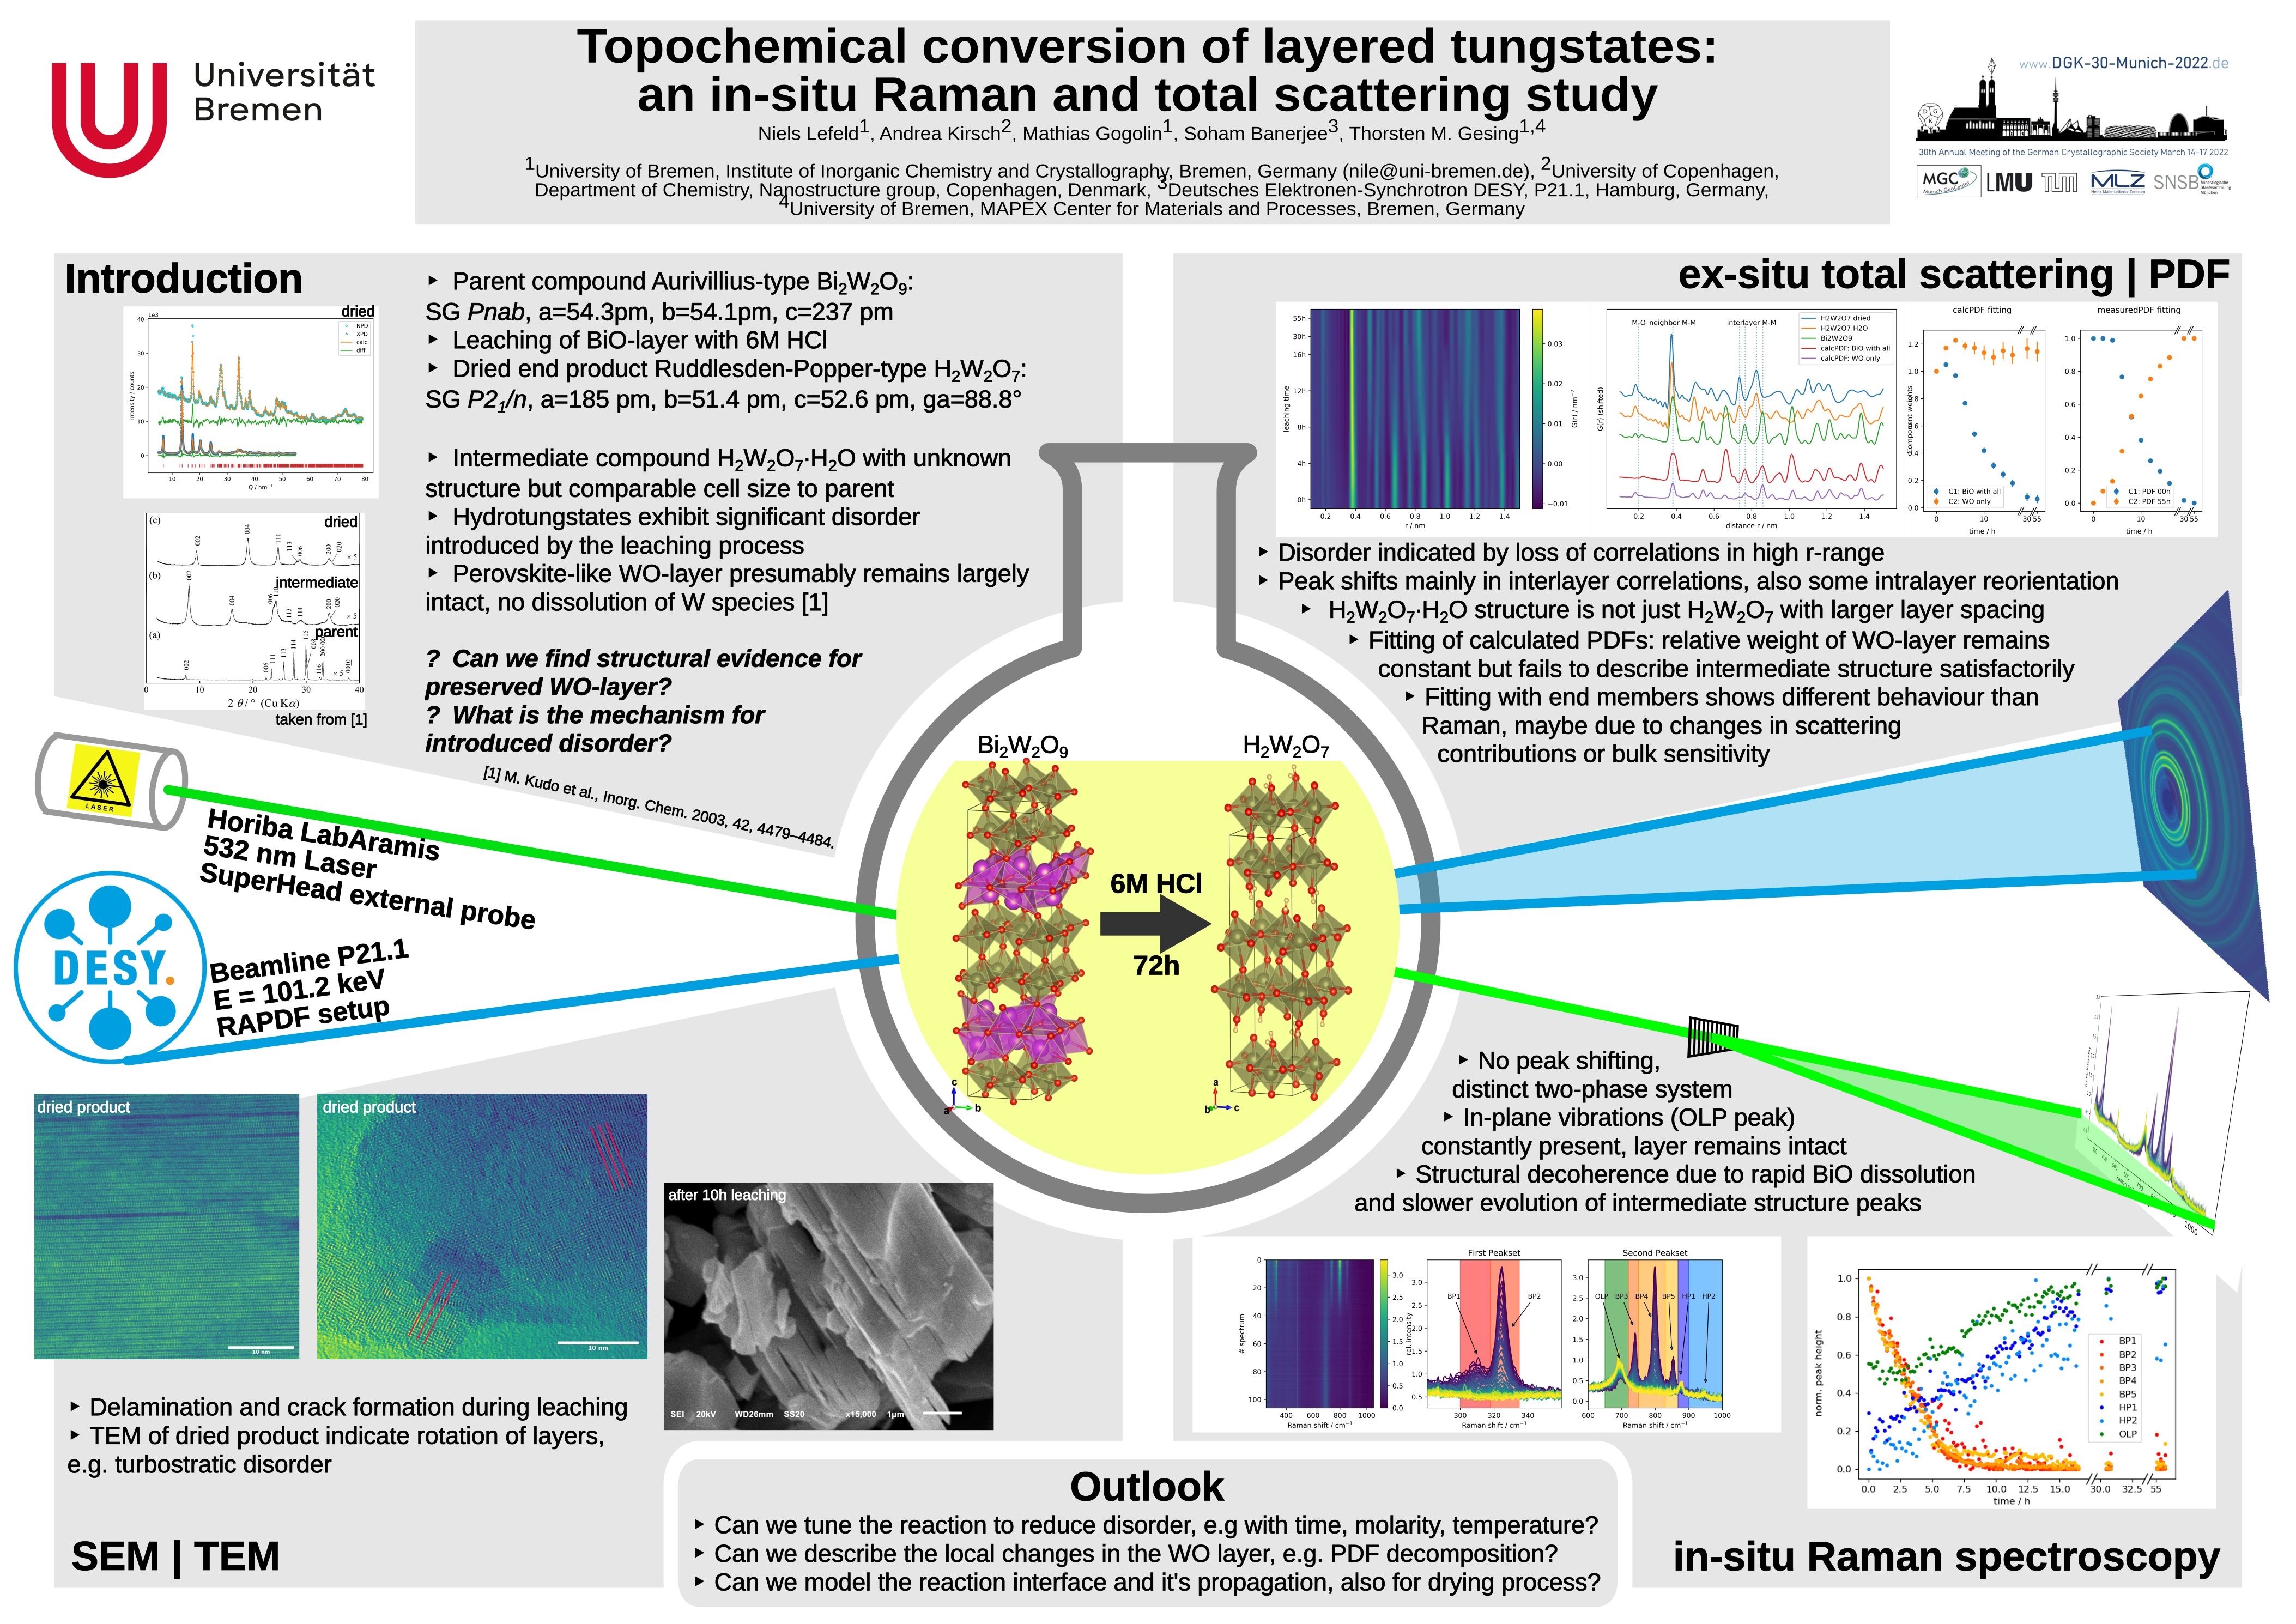 Niles' poster with the title "Topochemical conversion of layered tungstates: an in-situ Raman spectroscopy and total scattering study"